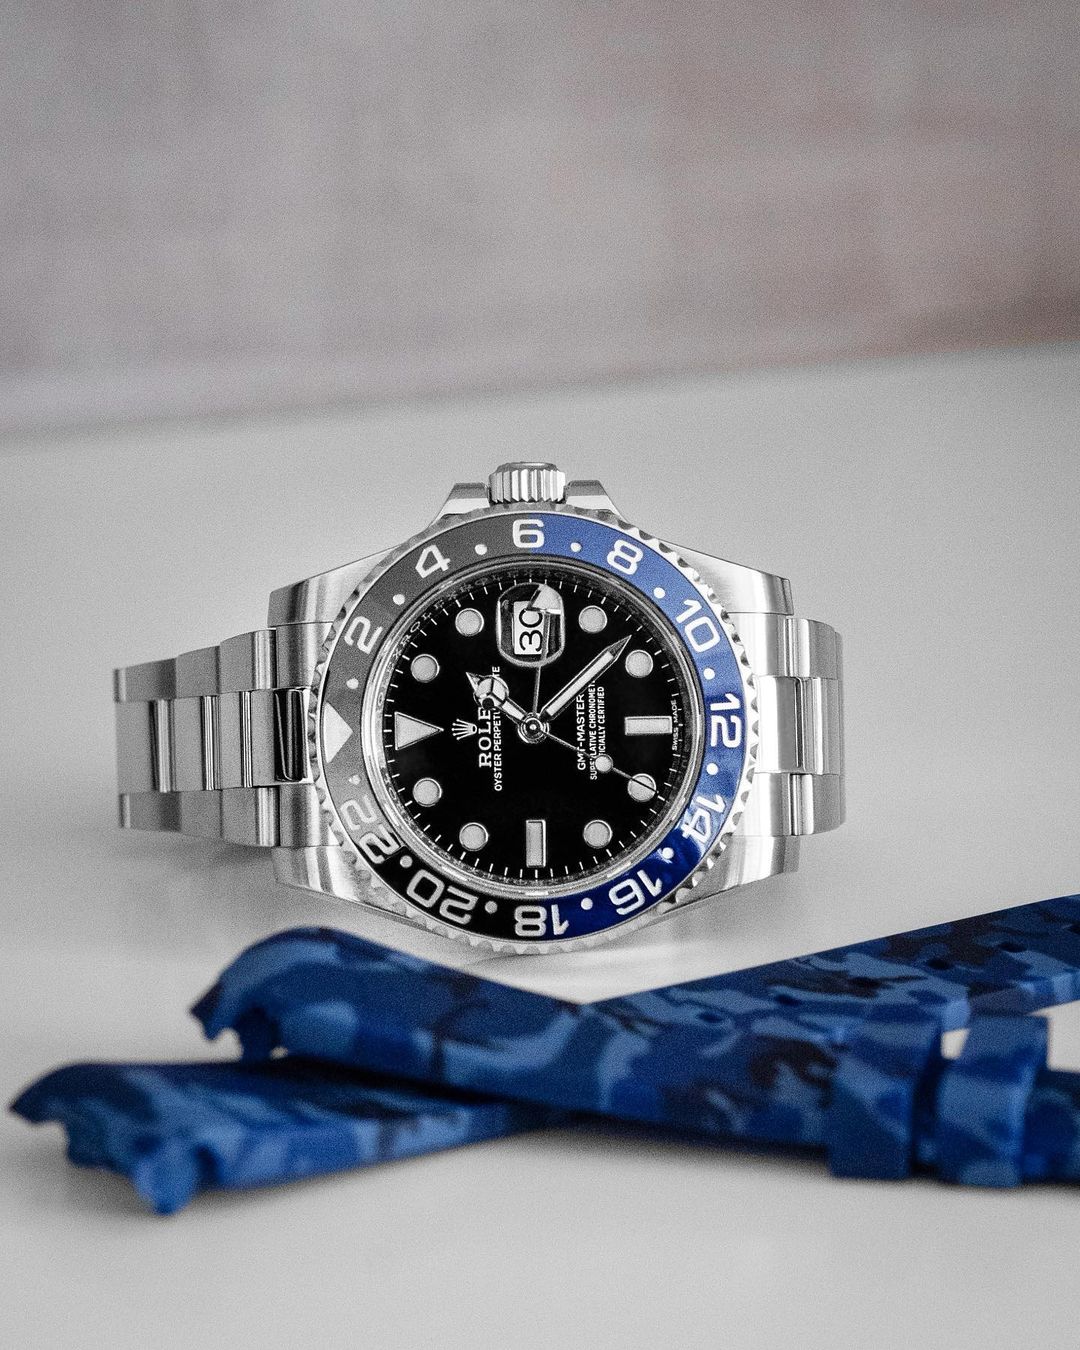 Rolex Jubilee vs Rolex Oyster - Which Rolex Bracelet Is Best for You?